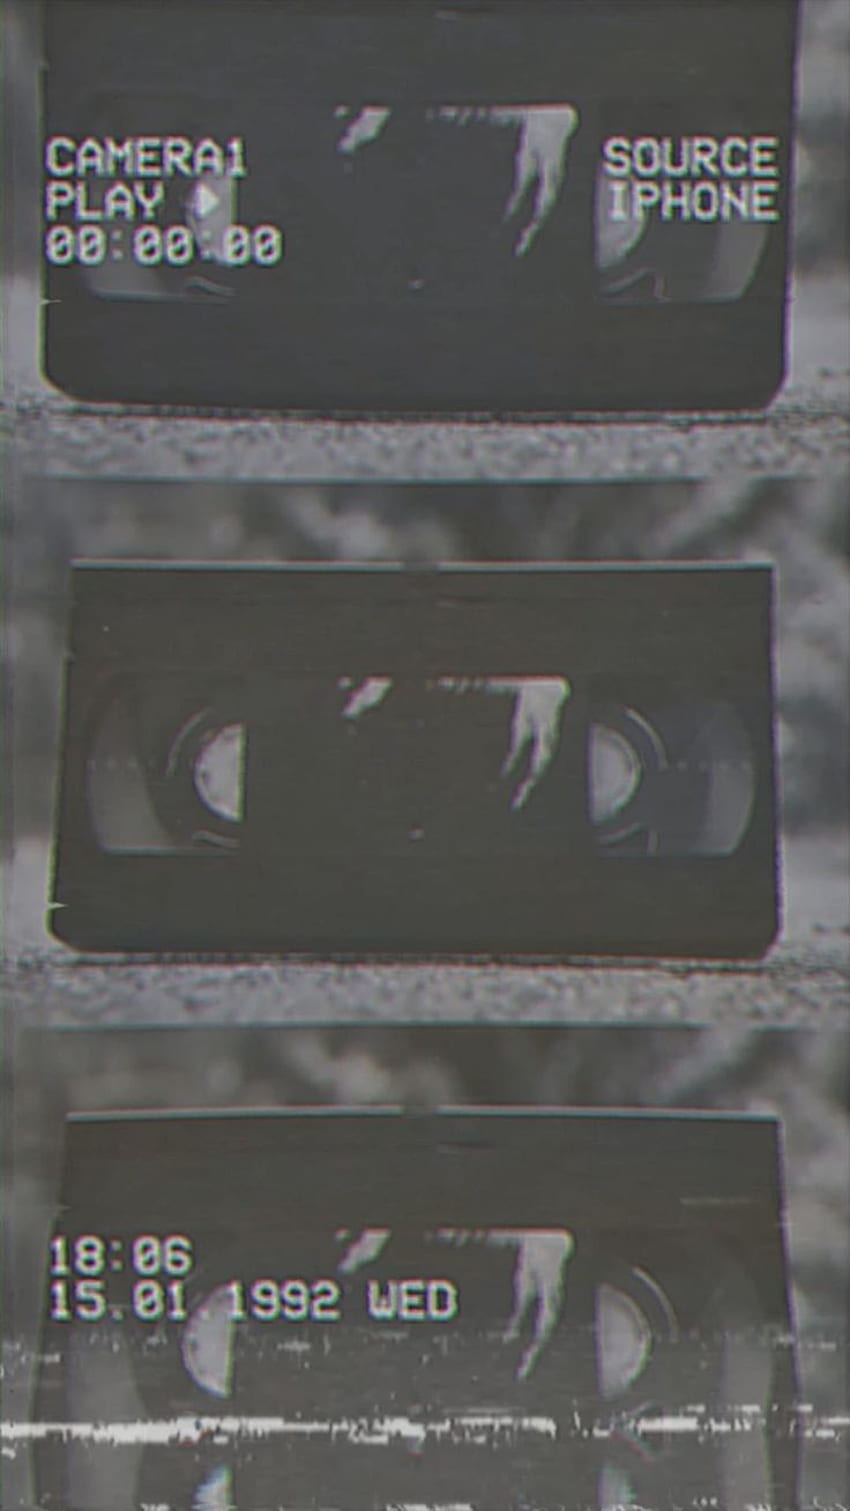 1920x1080px, 1080P Free download | Pink Vhs Tape Aesthetic, VHS Movies ...